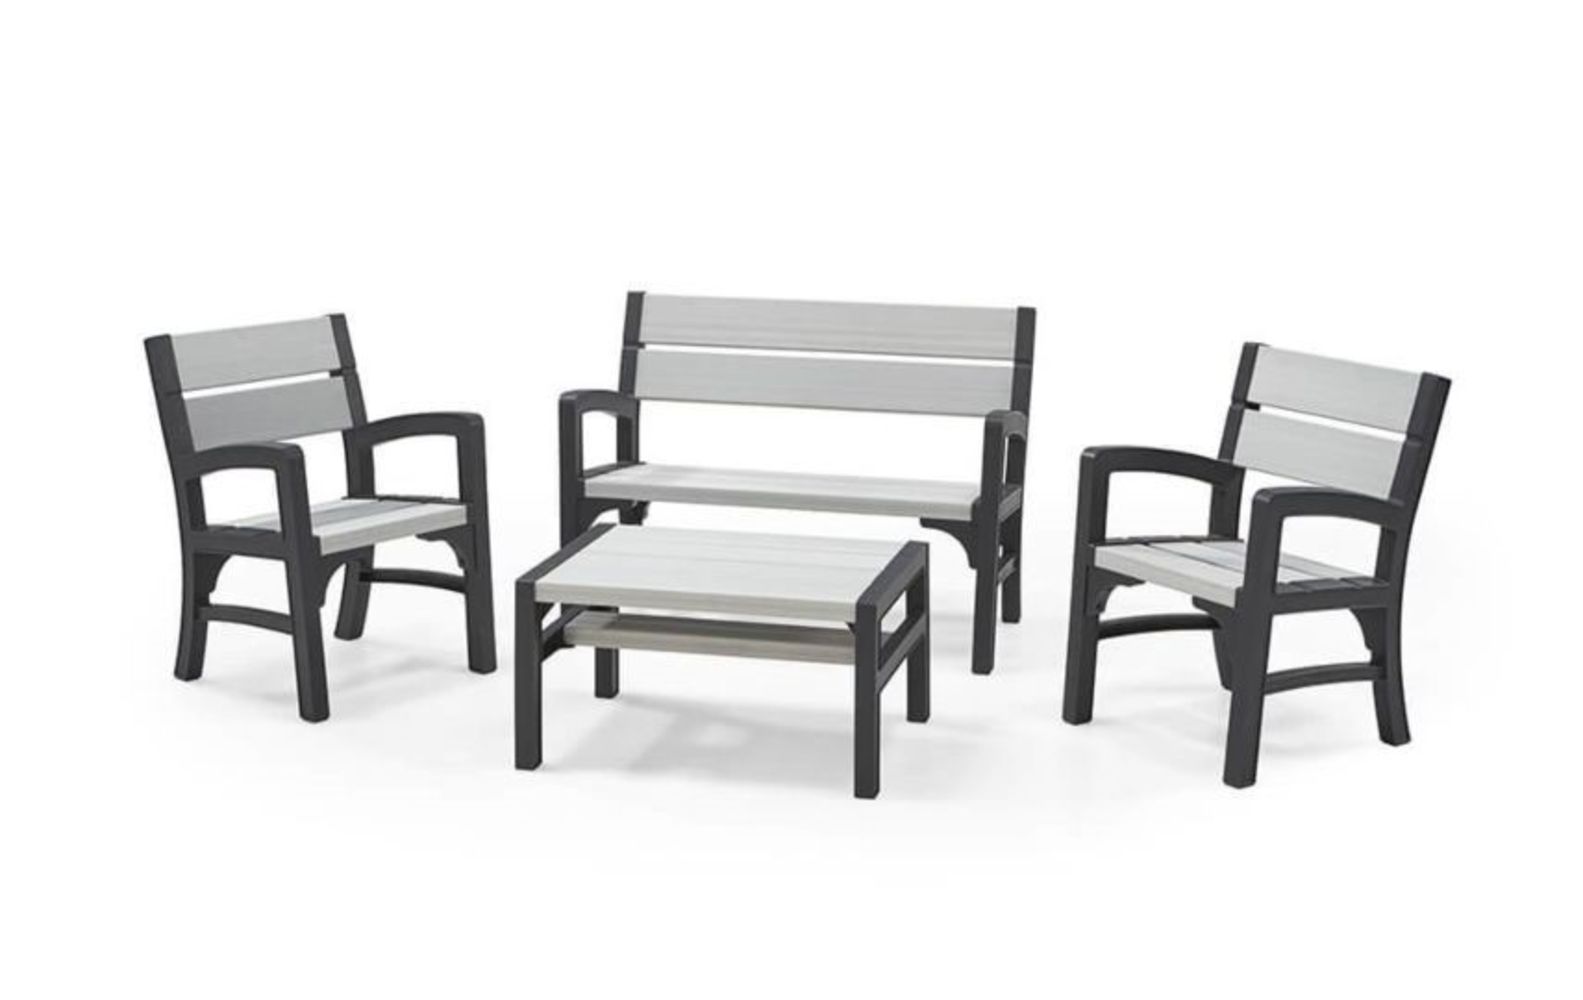 Keter Out door Bench Sets, new and boxes